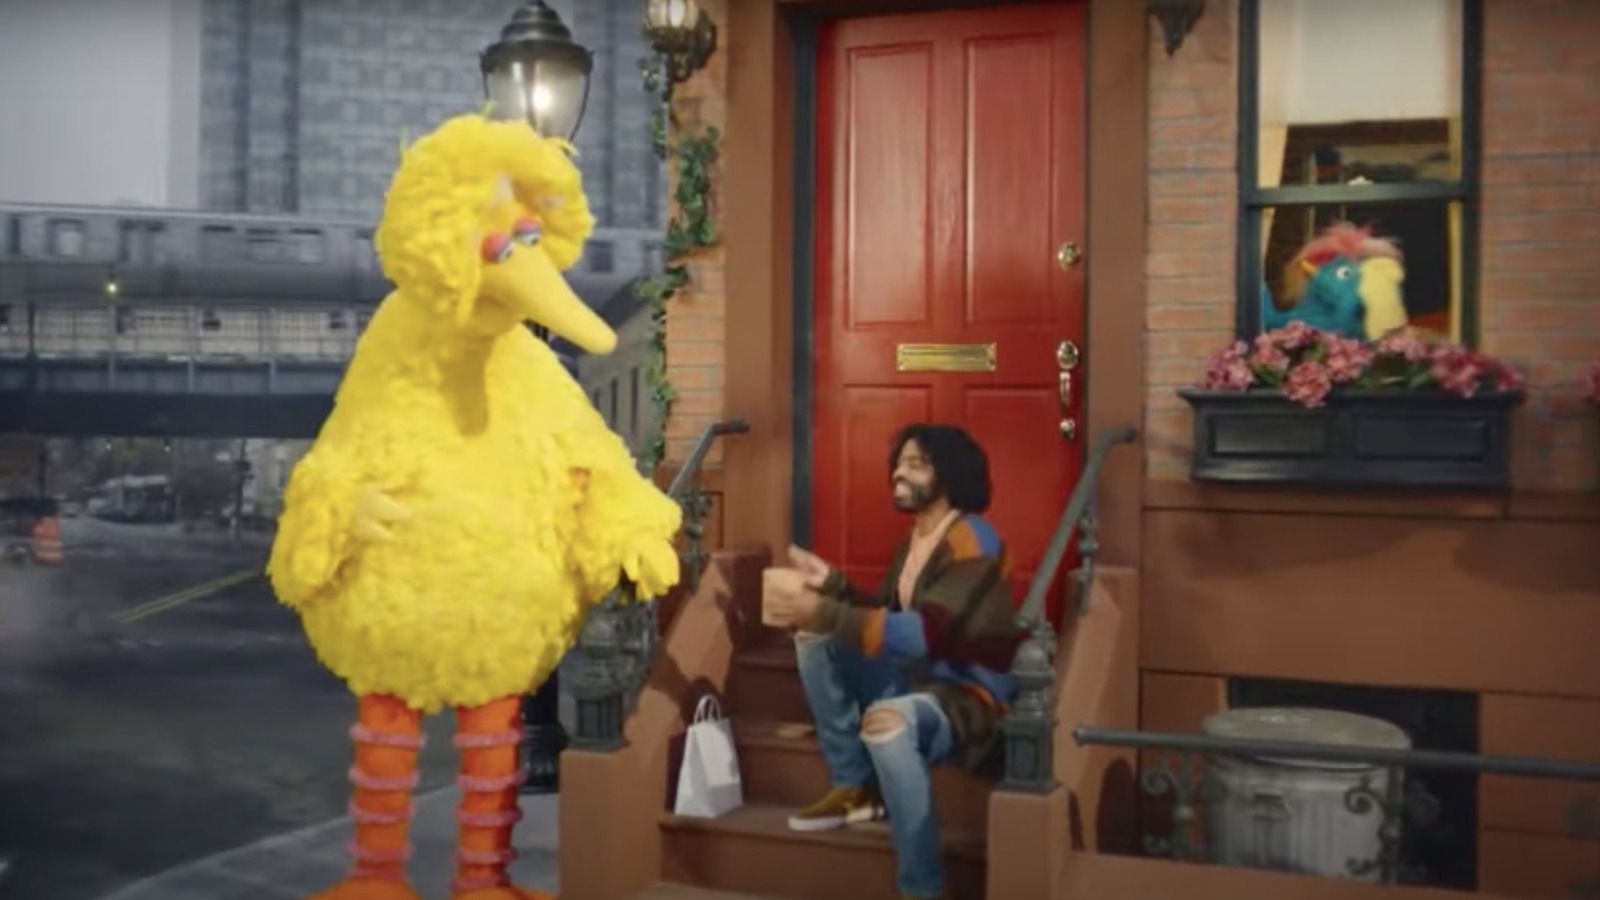 DoorDash's Sesame Street Commercial Has The Divided